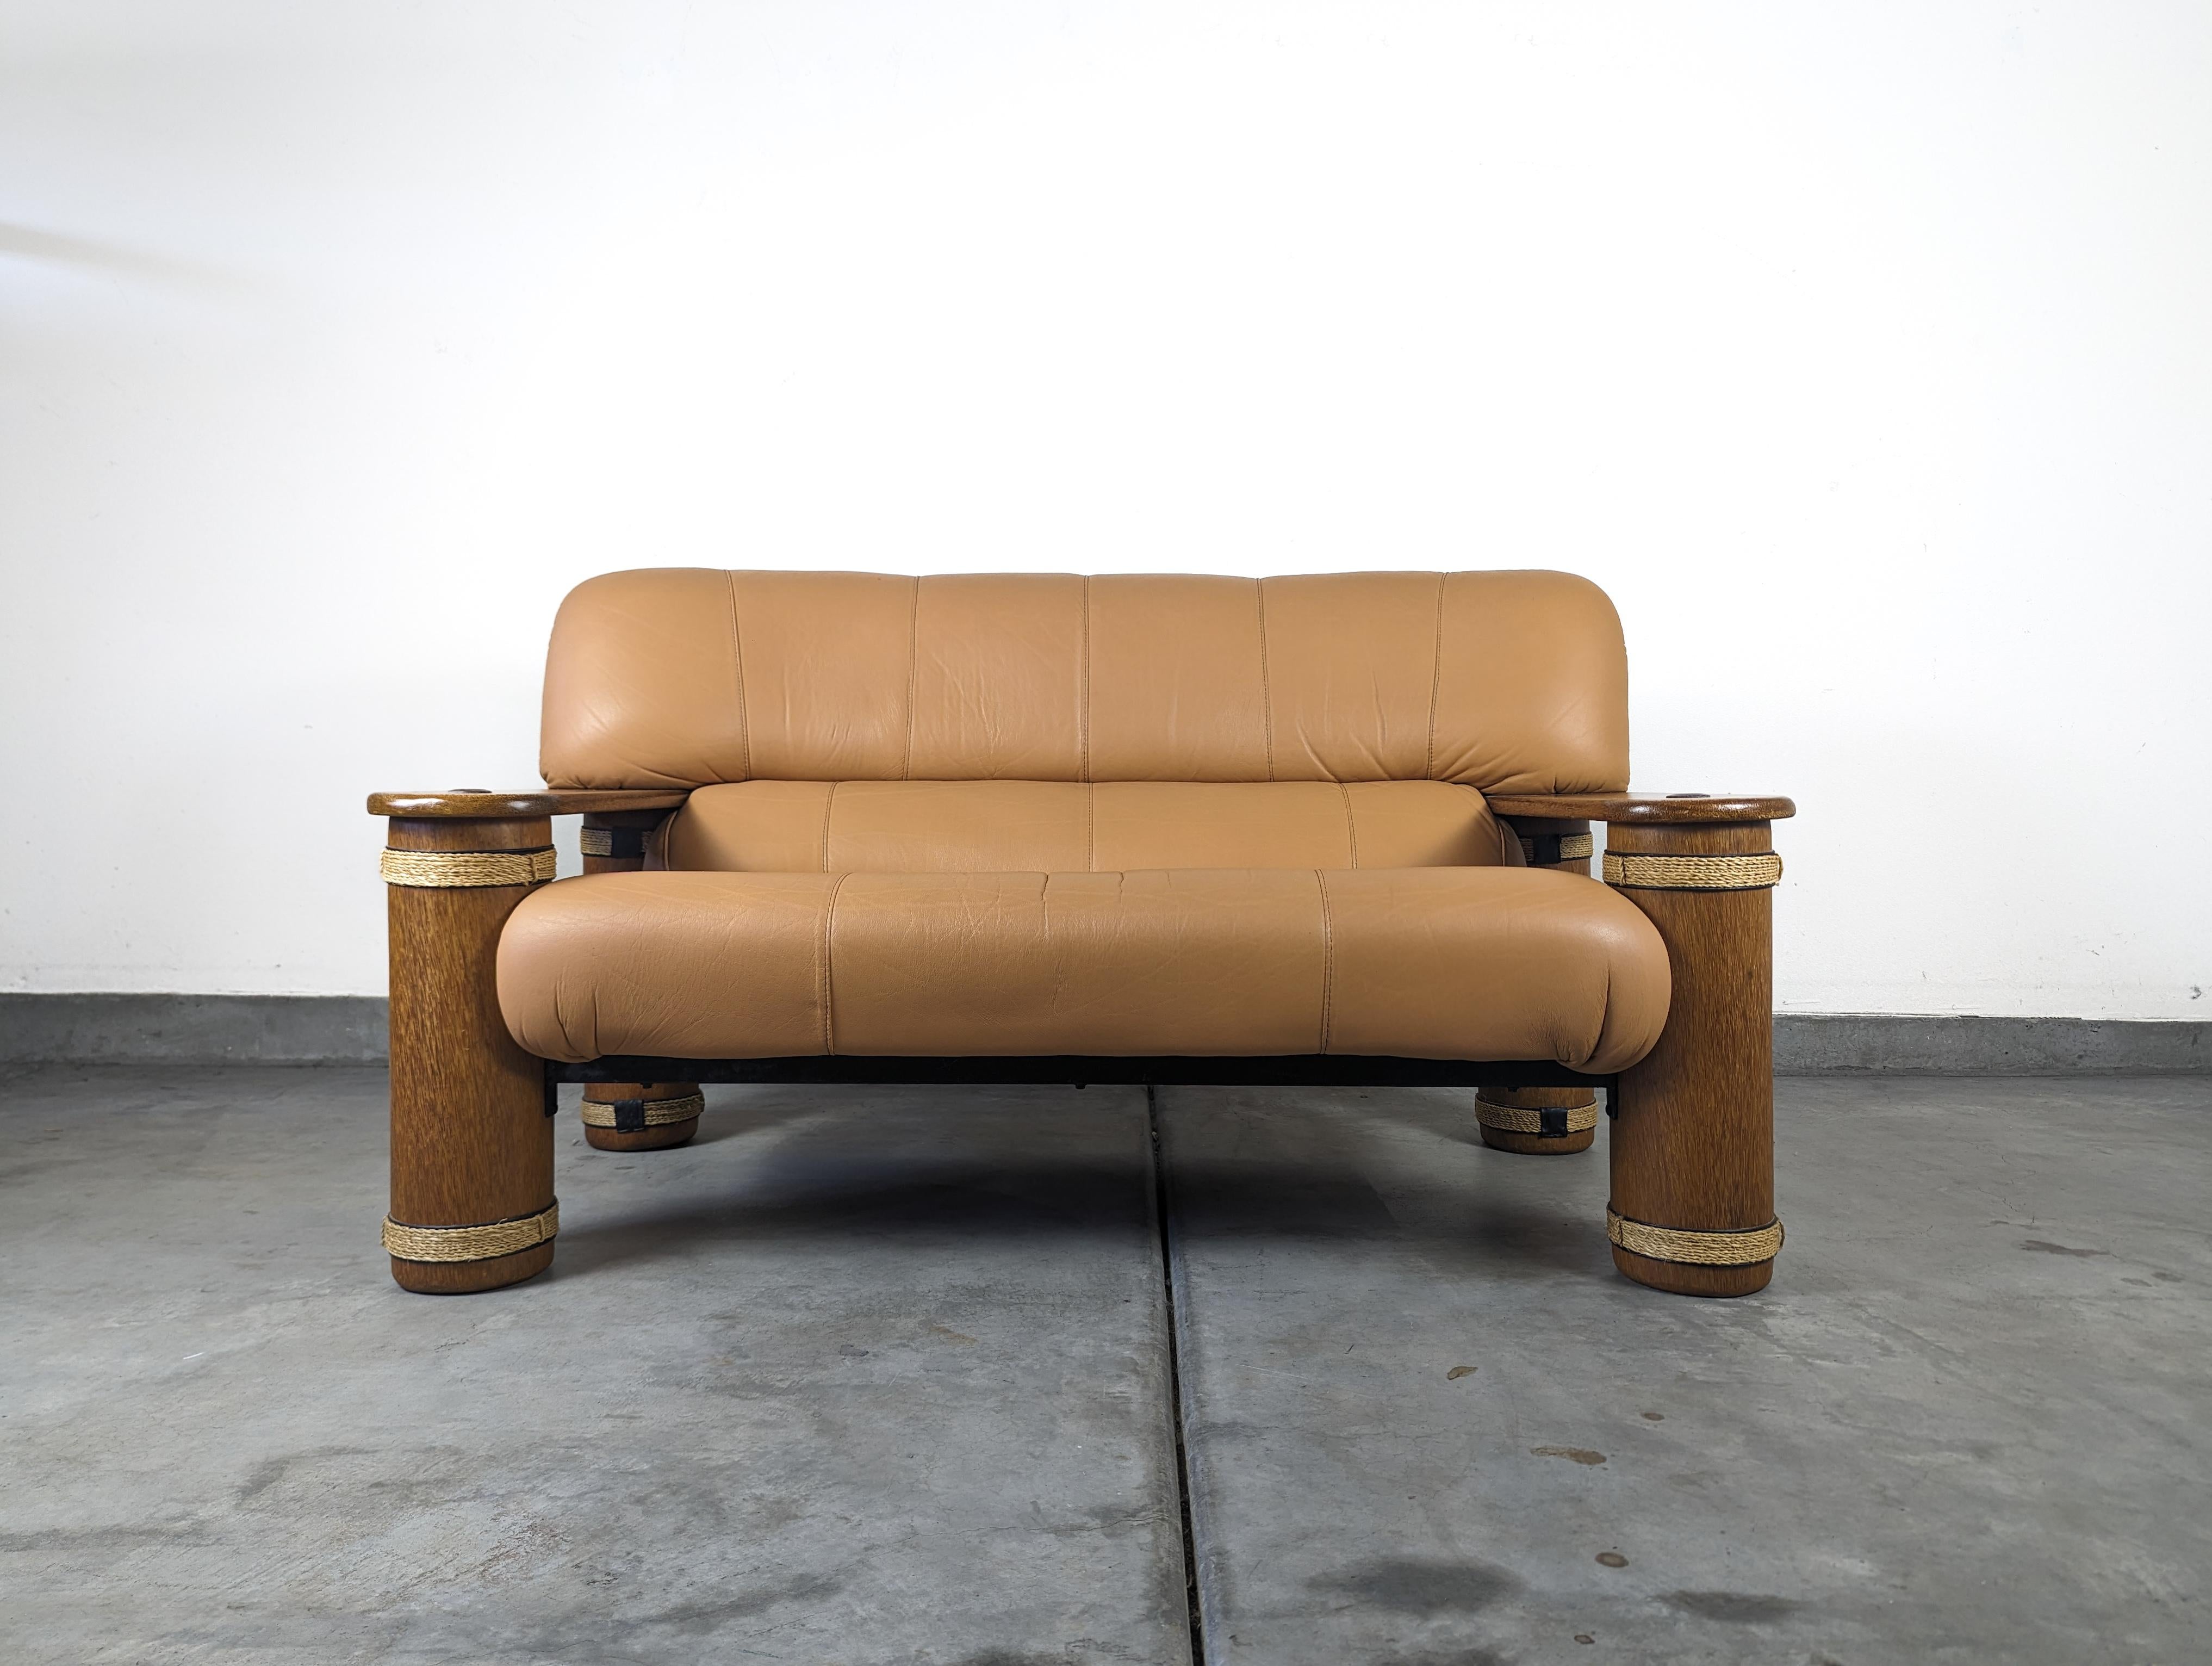 Late 20th Century Vintage Leather and Palmwood Loveseat Sofa by Pacific Green, c1990s For Sale